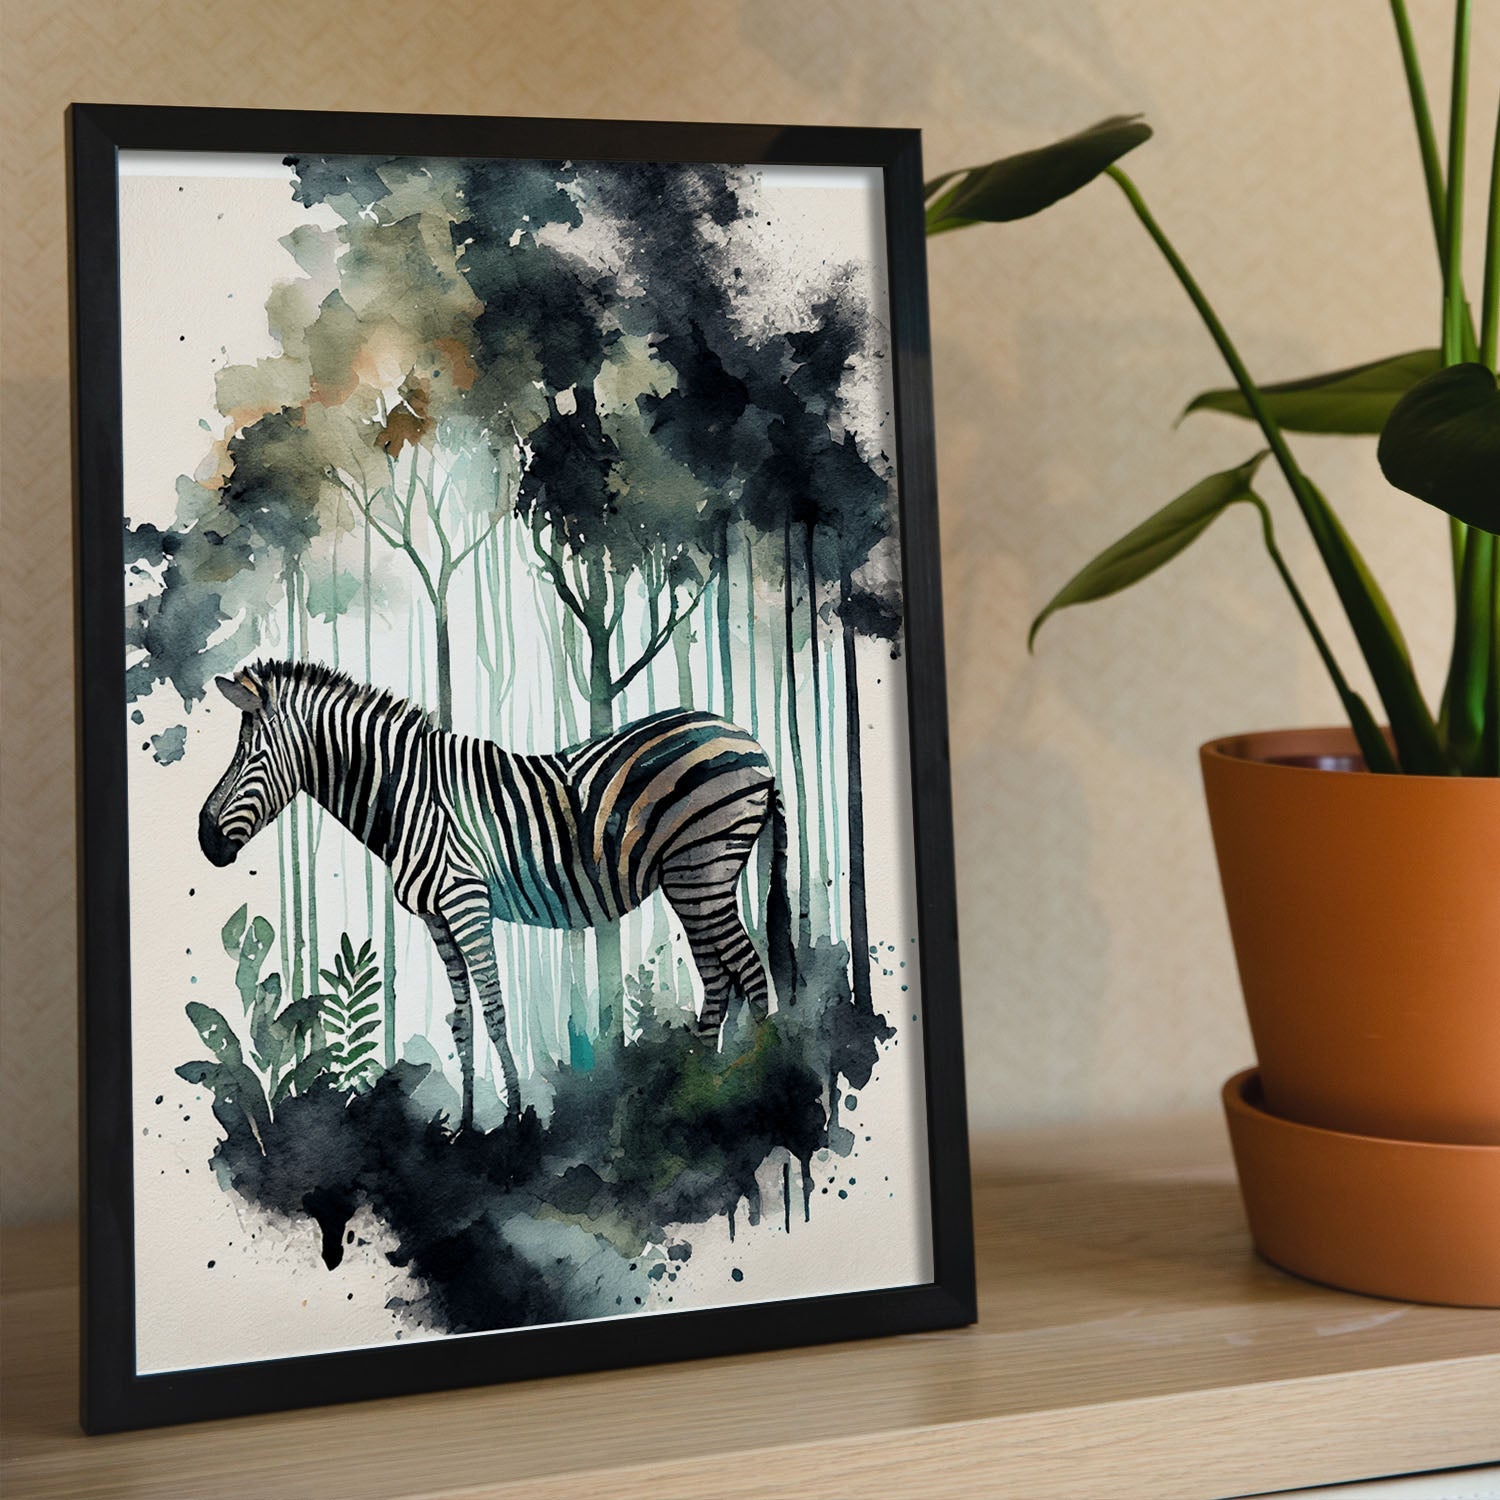 Nacnic Watercolor of Zebra in the forest. Aesthetic Wall Art Prints for Bedroom or Living Room Design.-Artwork-Nacnic-A4-Sin Marco-Nacnic Estudio SL